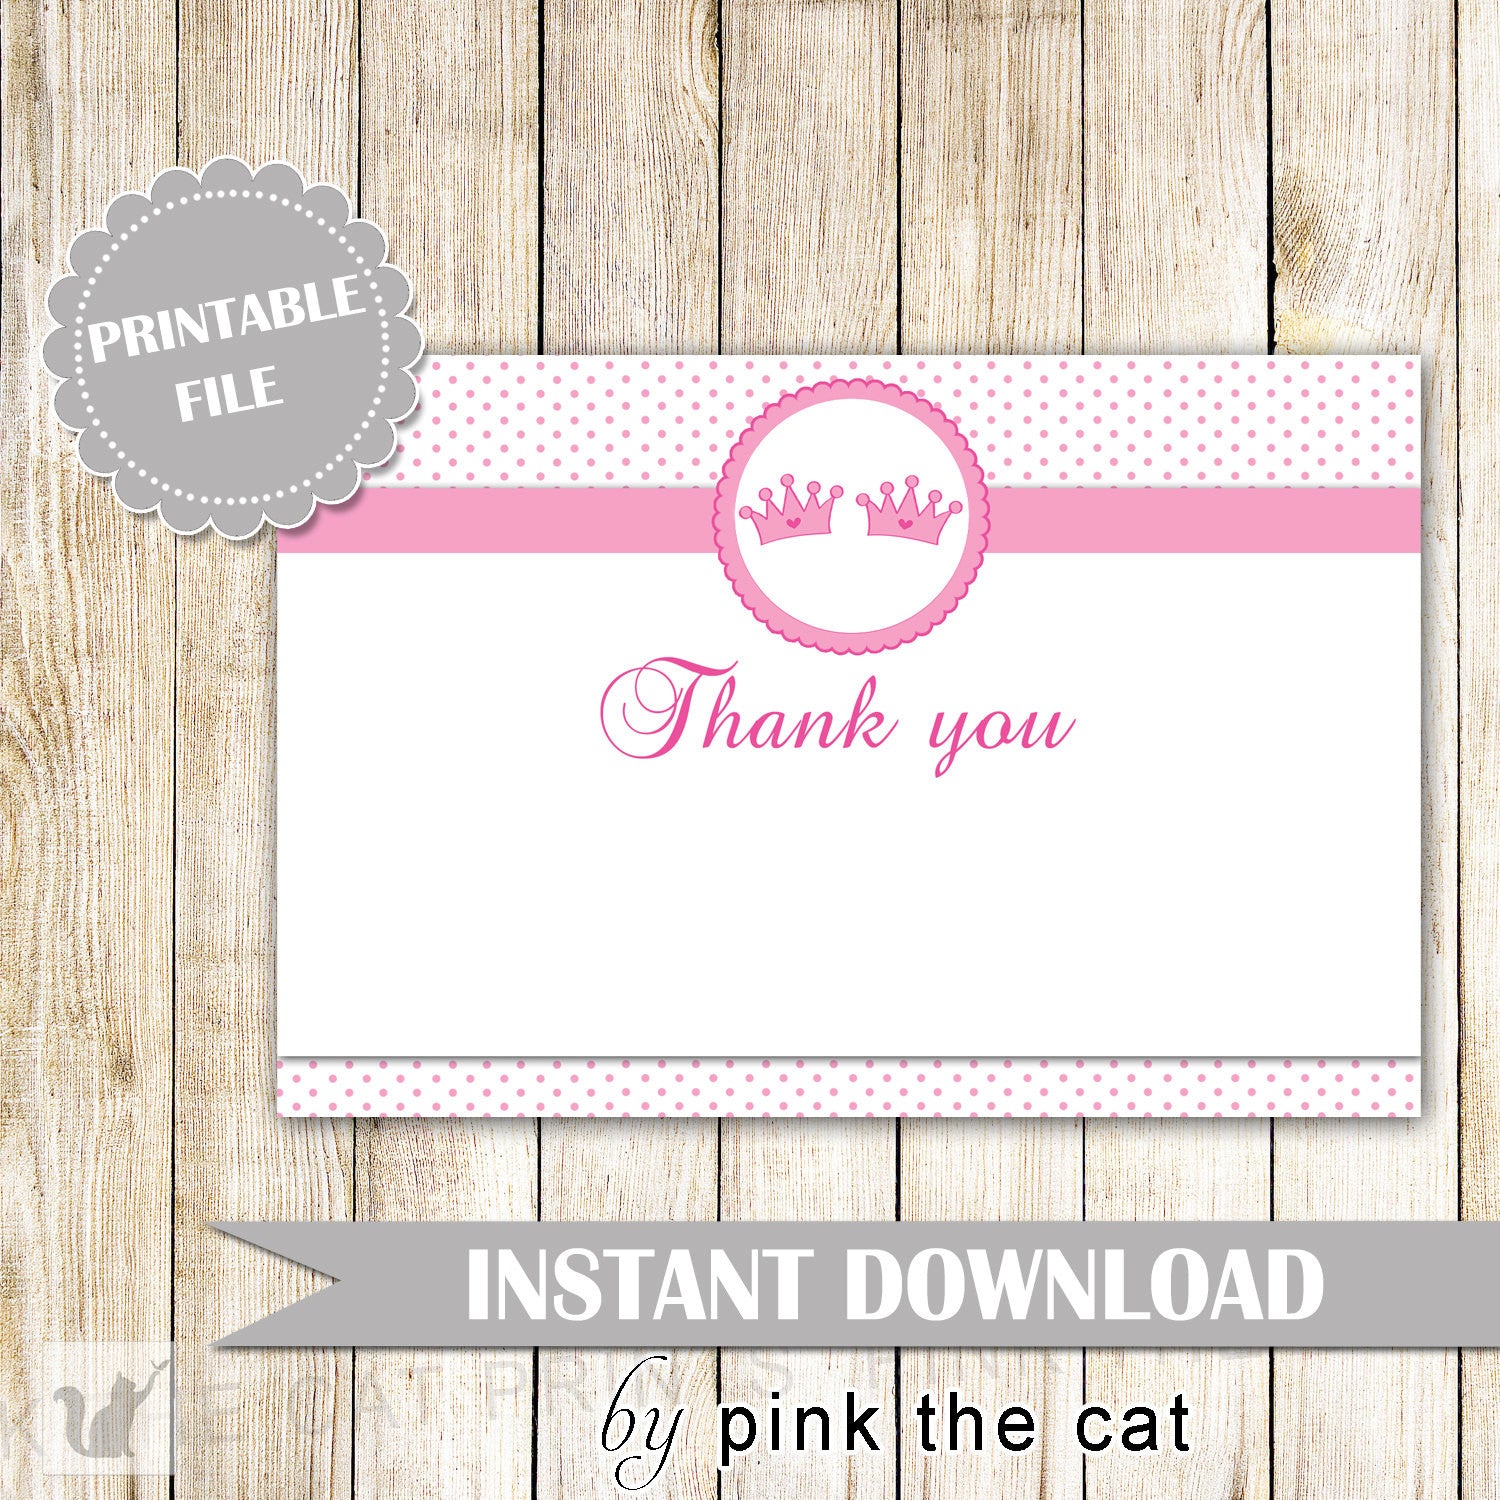 Princess Thank You Card Note - Twin Girls Birthday Party Baby Shower Pink Polka Dots Printable INSTANT DOWNLOAD